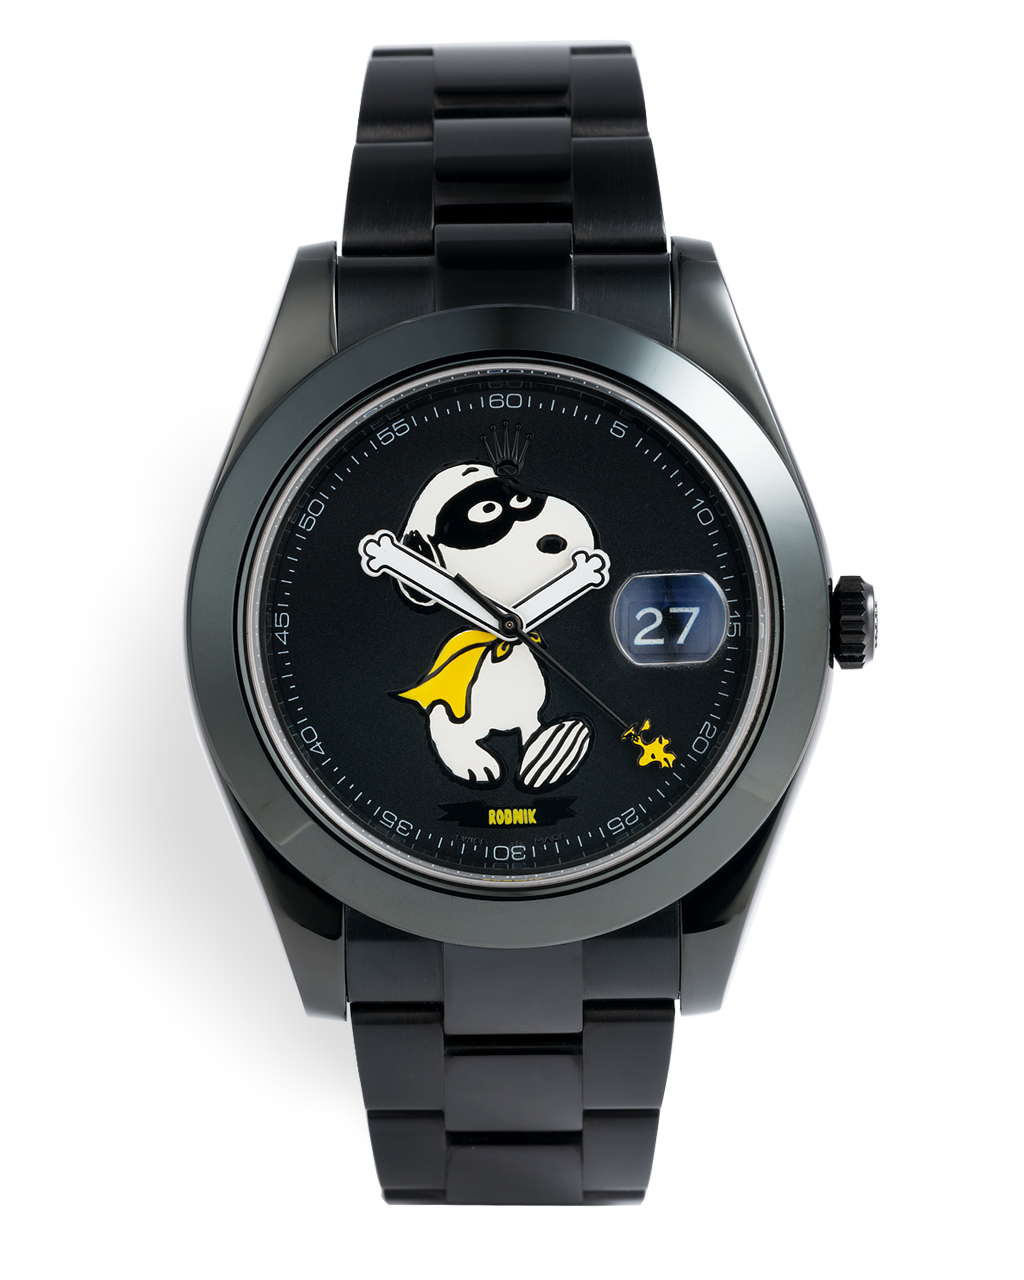 Bamford x The Rodnik Band Snoopy Customized Rolex Limited Edition Watch